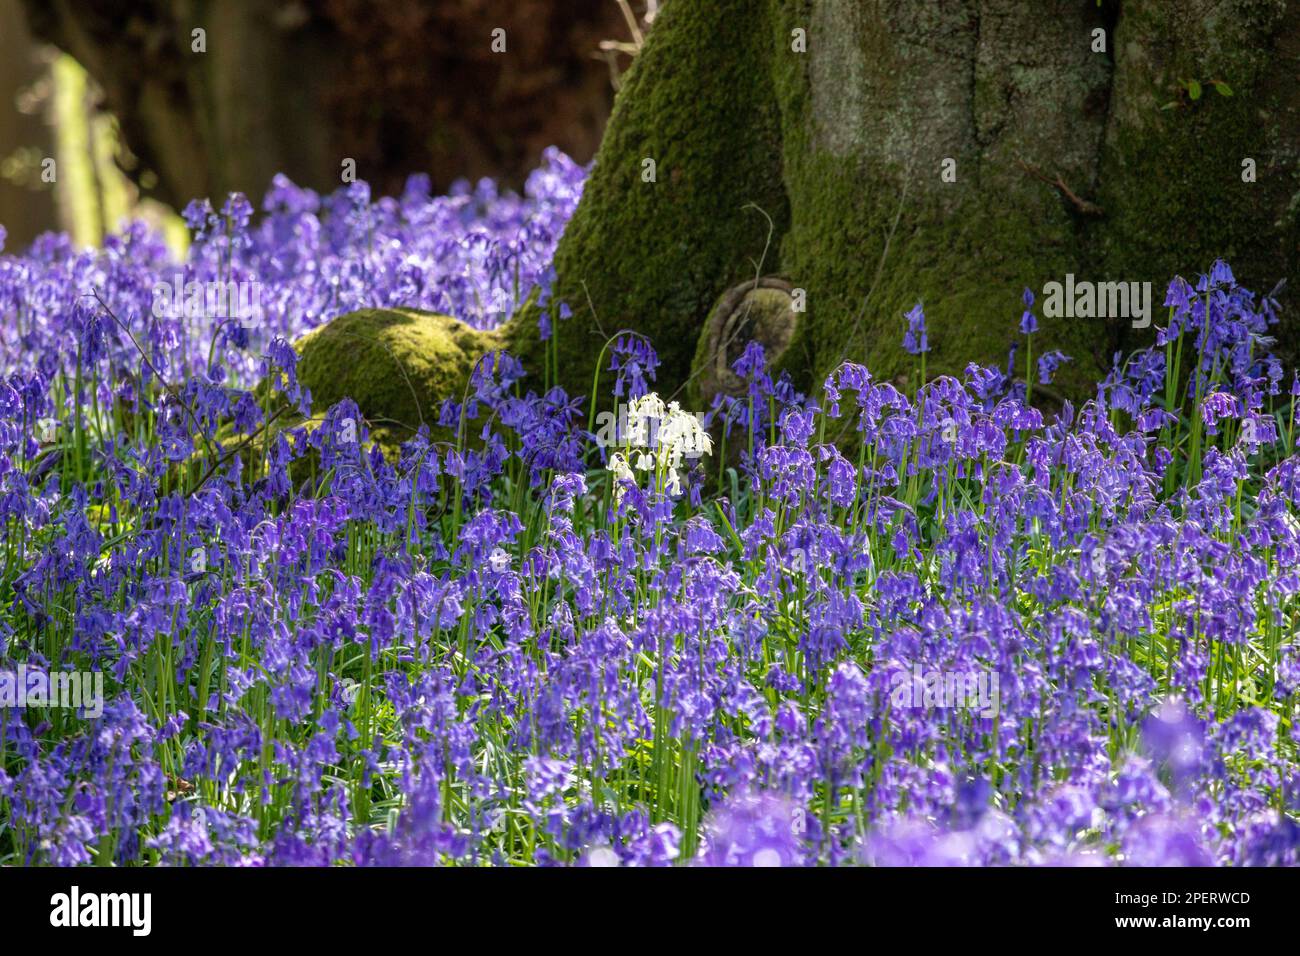 Albino bluebell amount bluebells in an English woodland Stock Photo